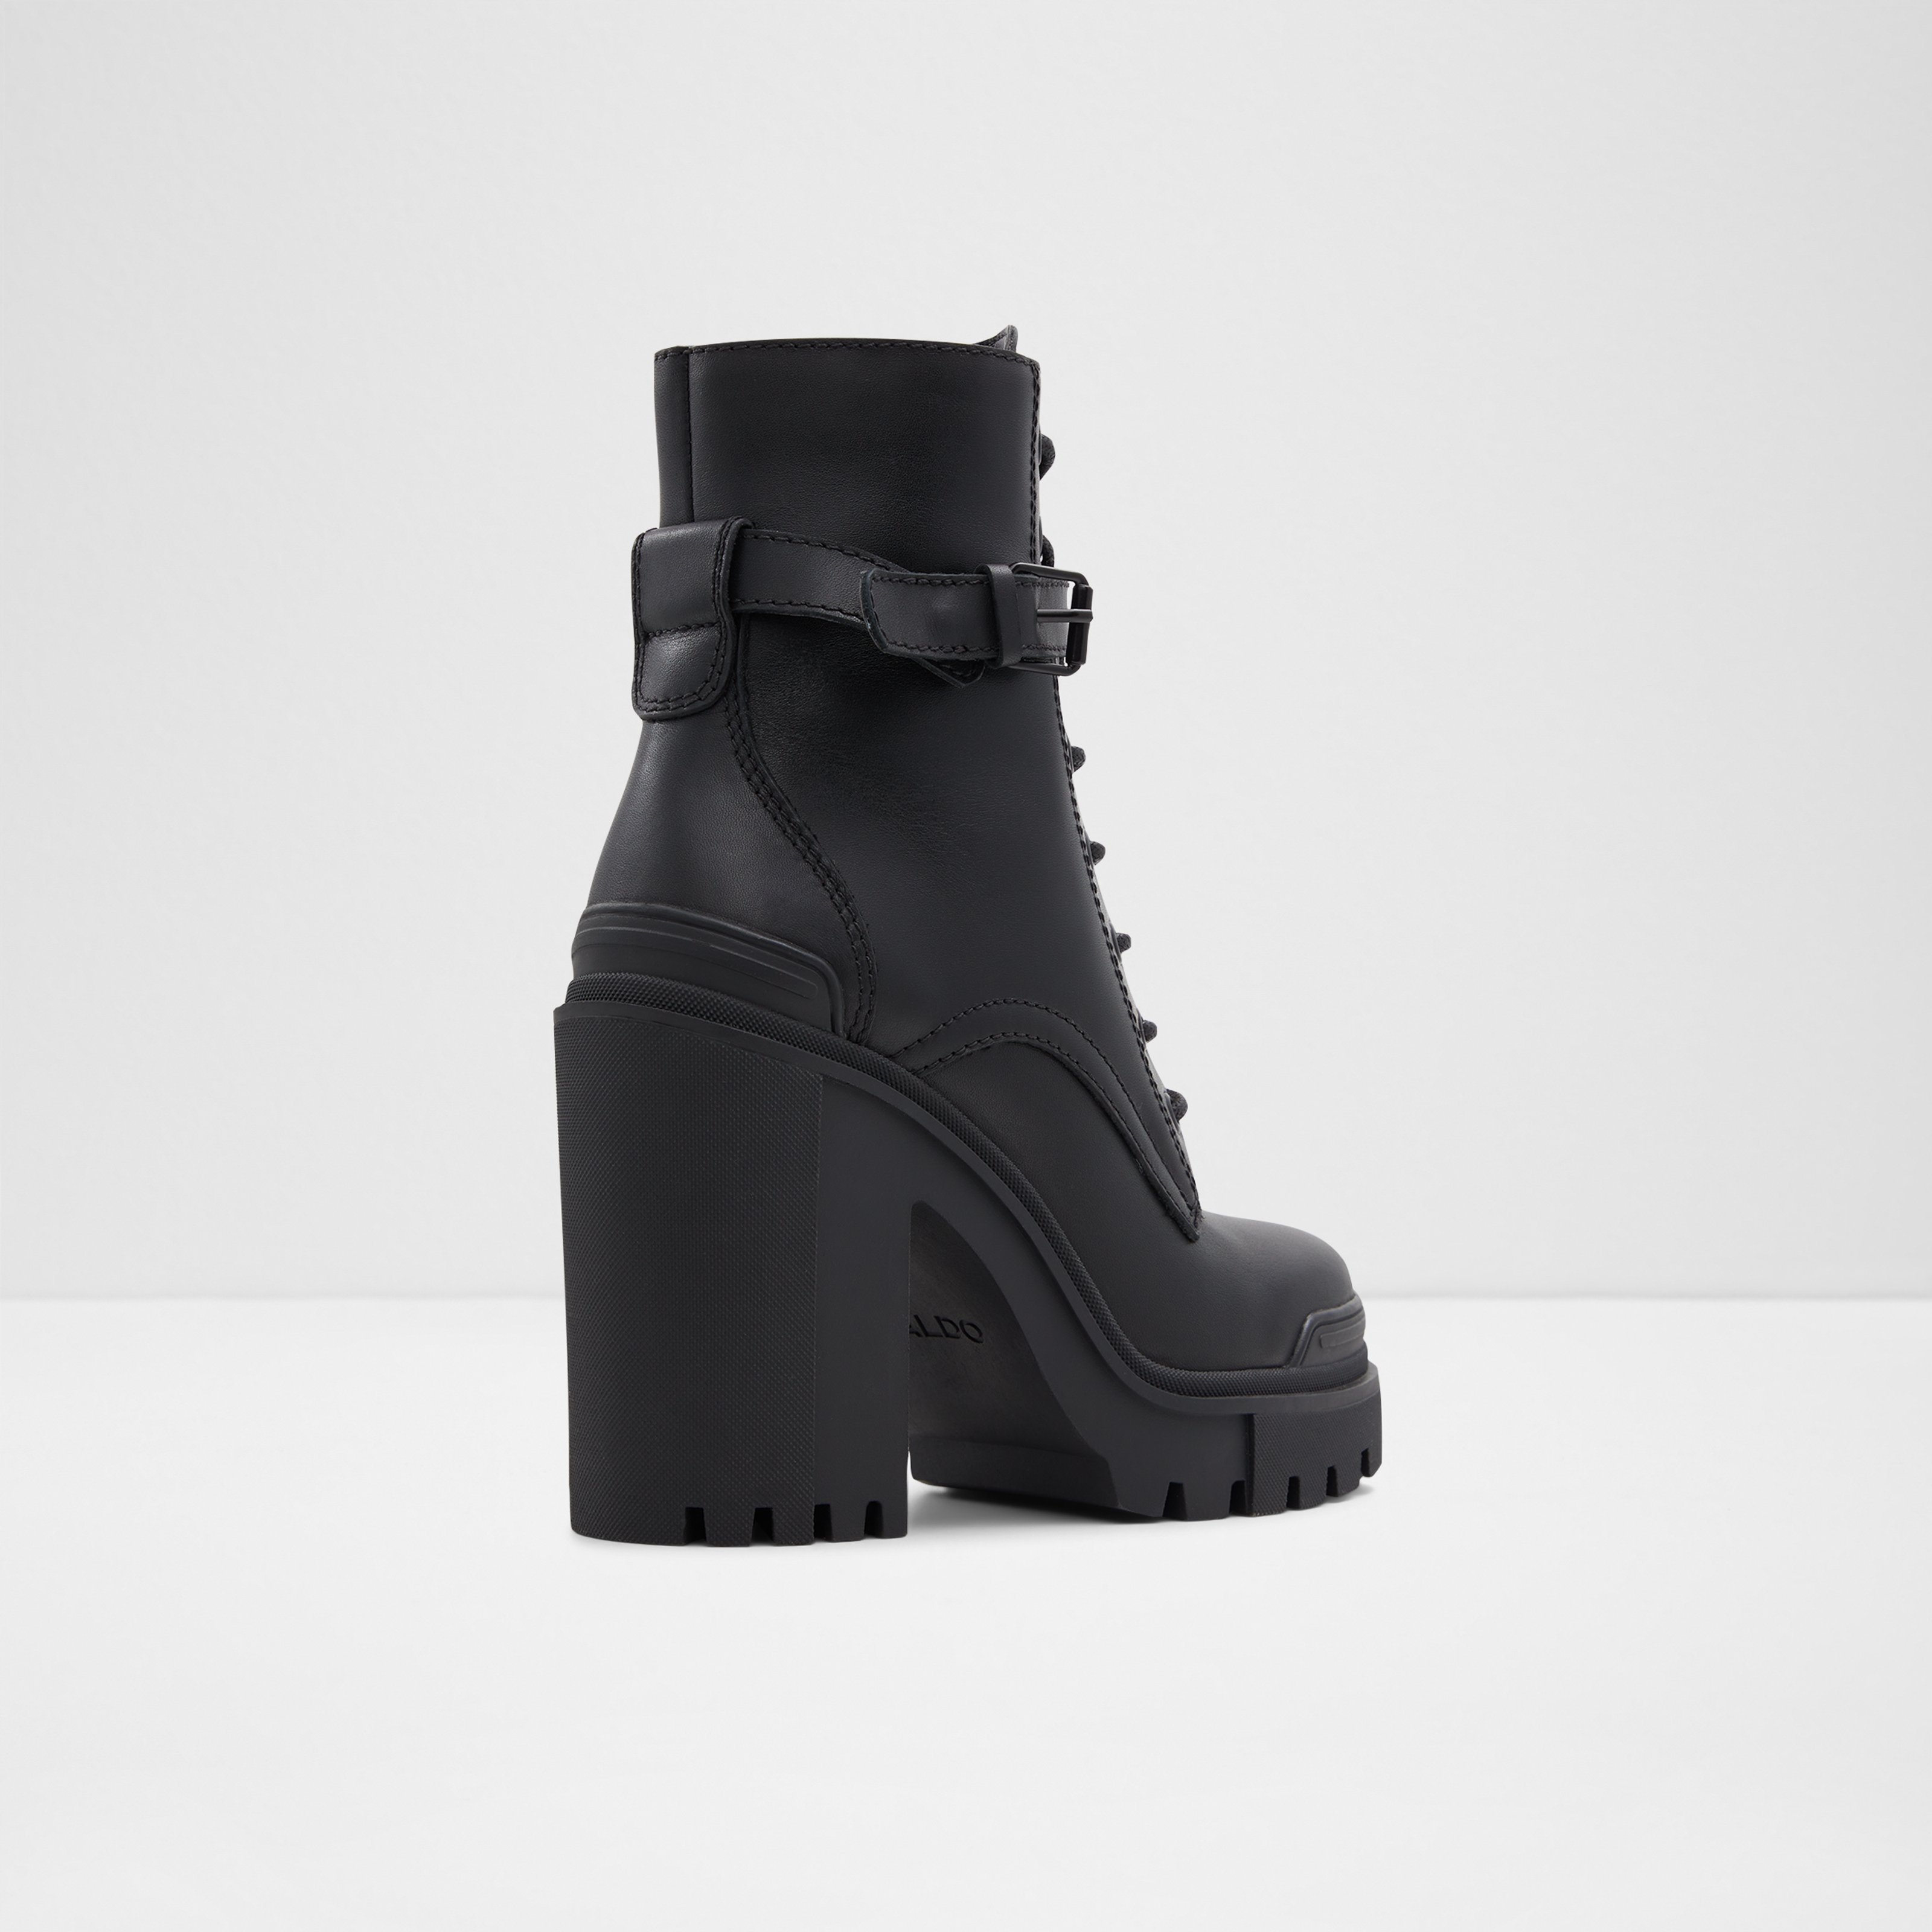 Uplift Other Black Women's Casual boots | ALDO US